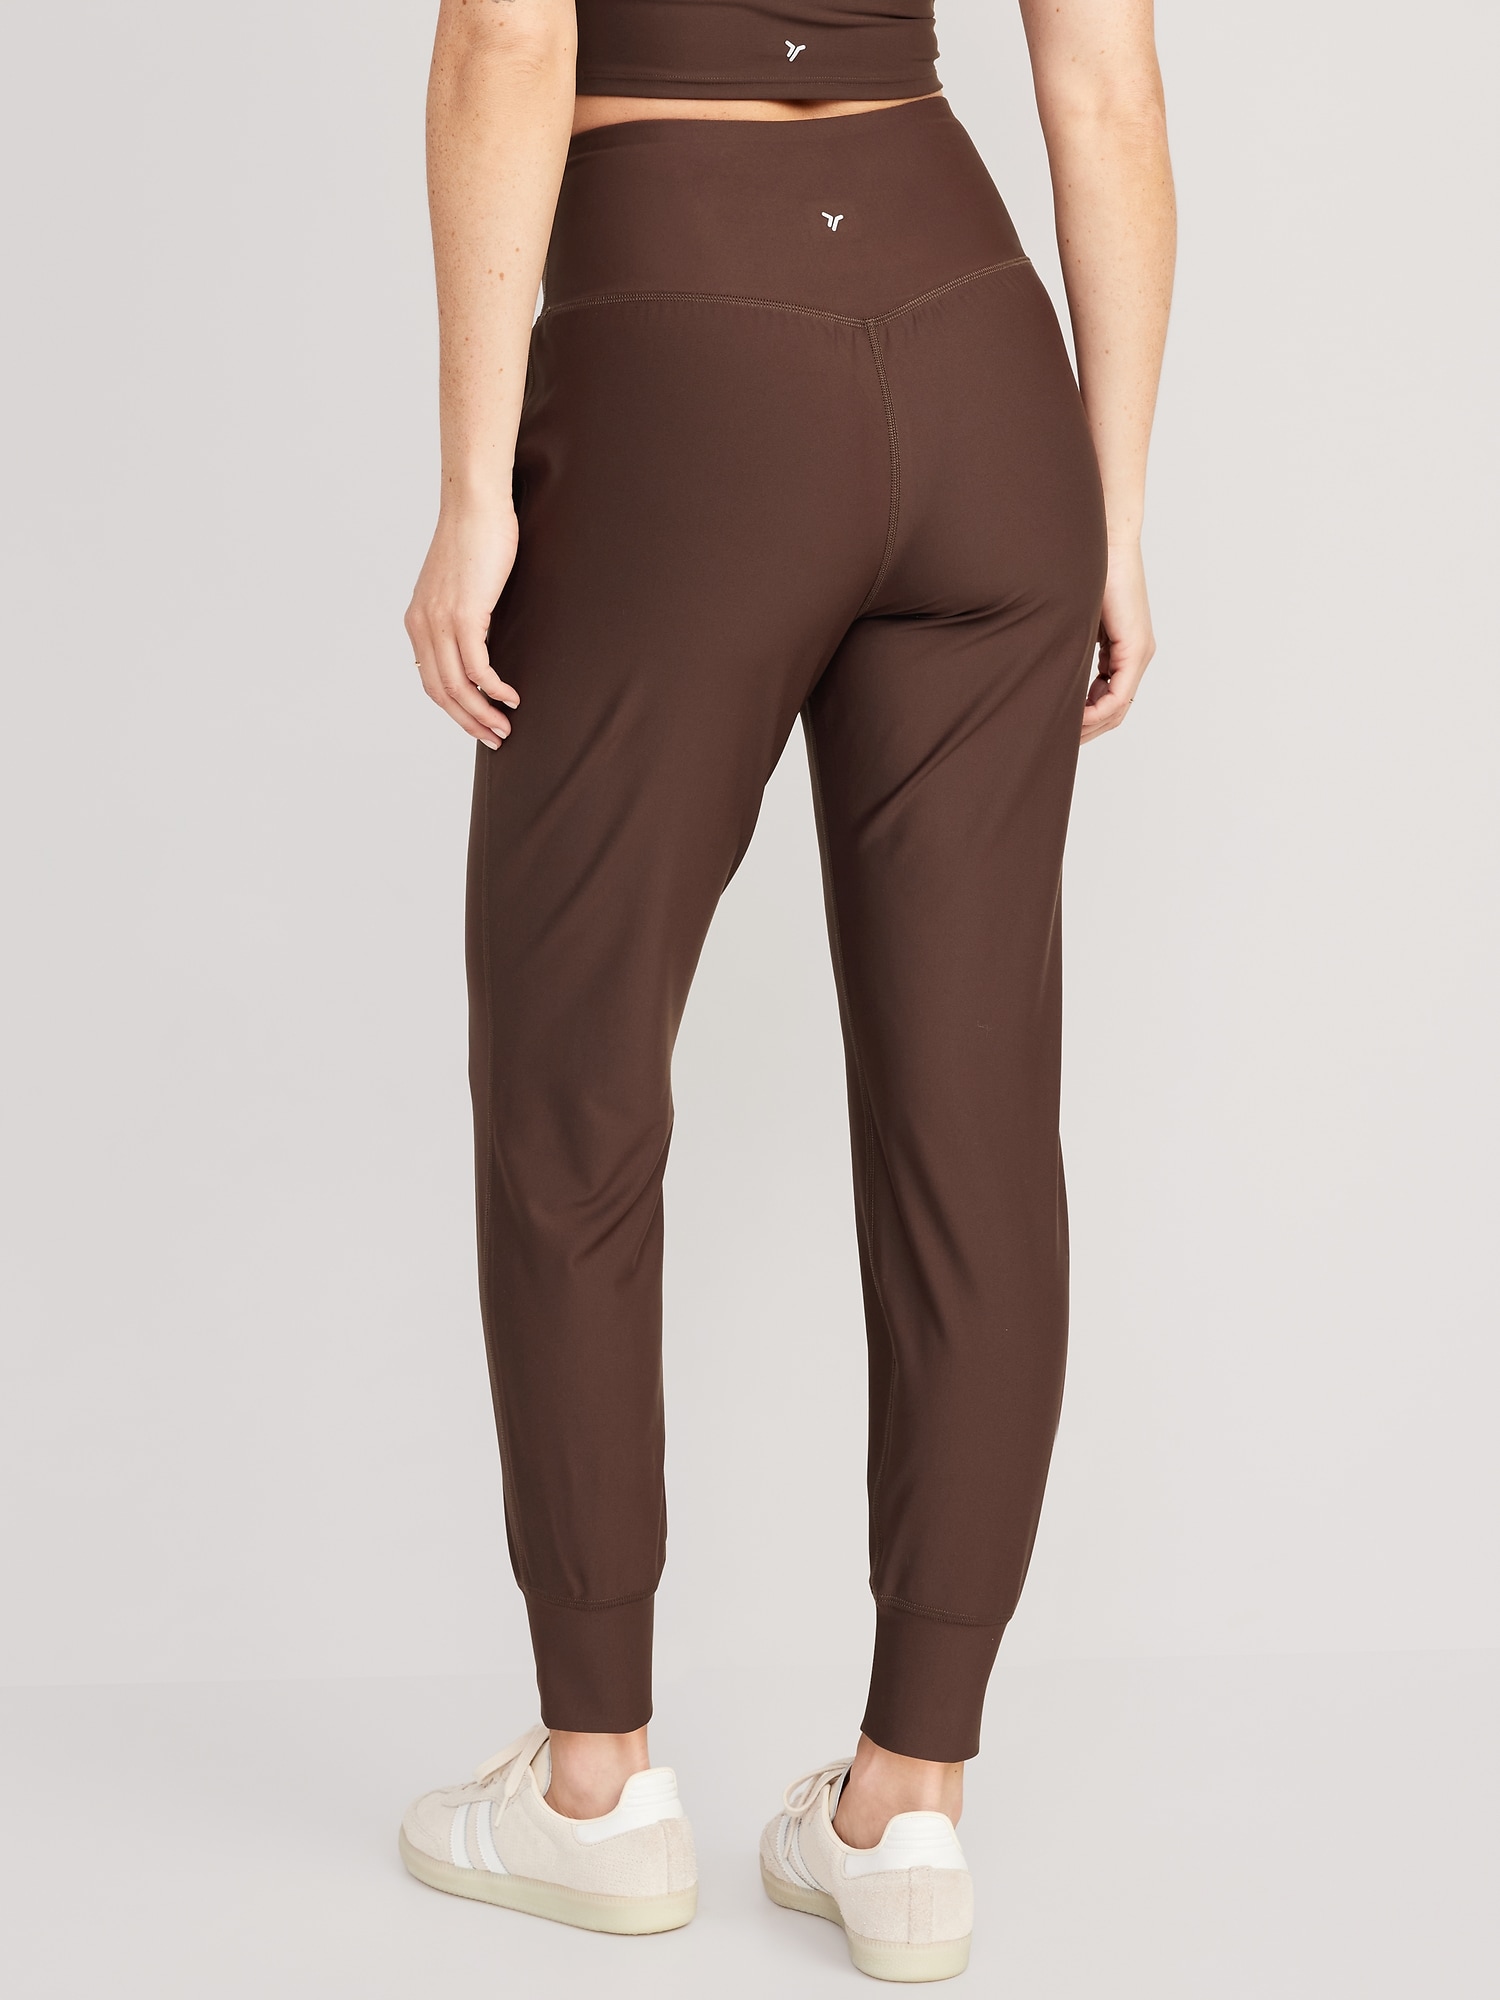 Elevate Comfort, Elevate Style, High Sole Joggers for Women